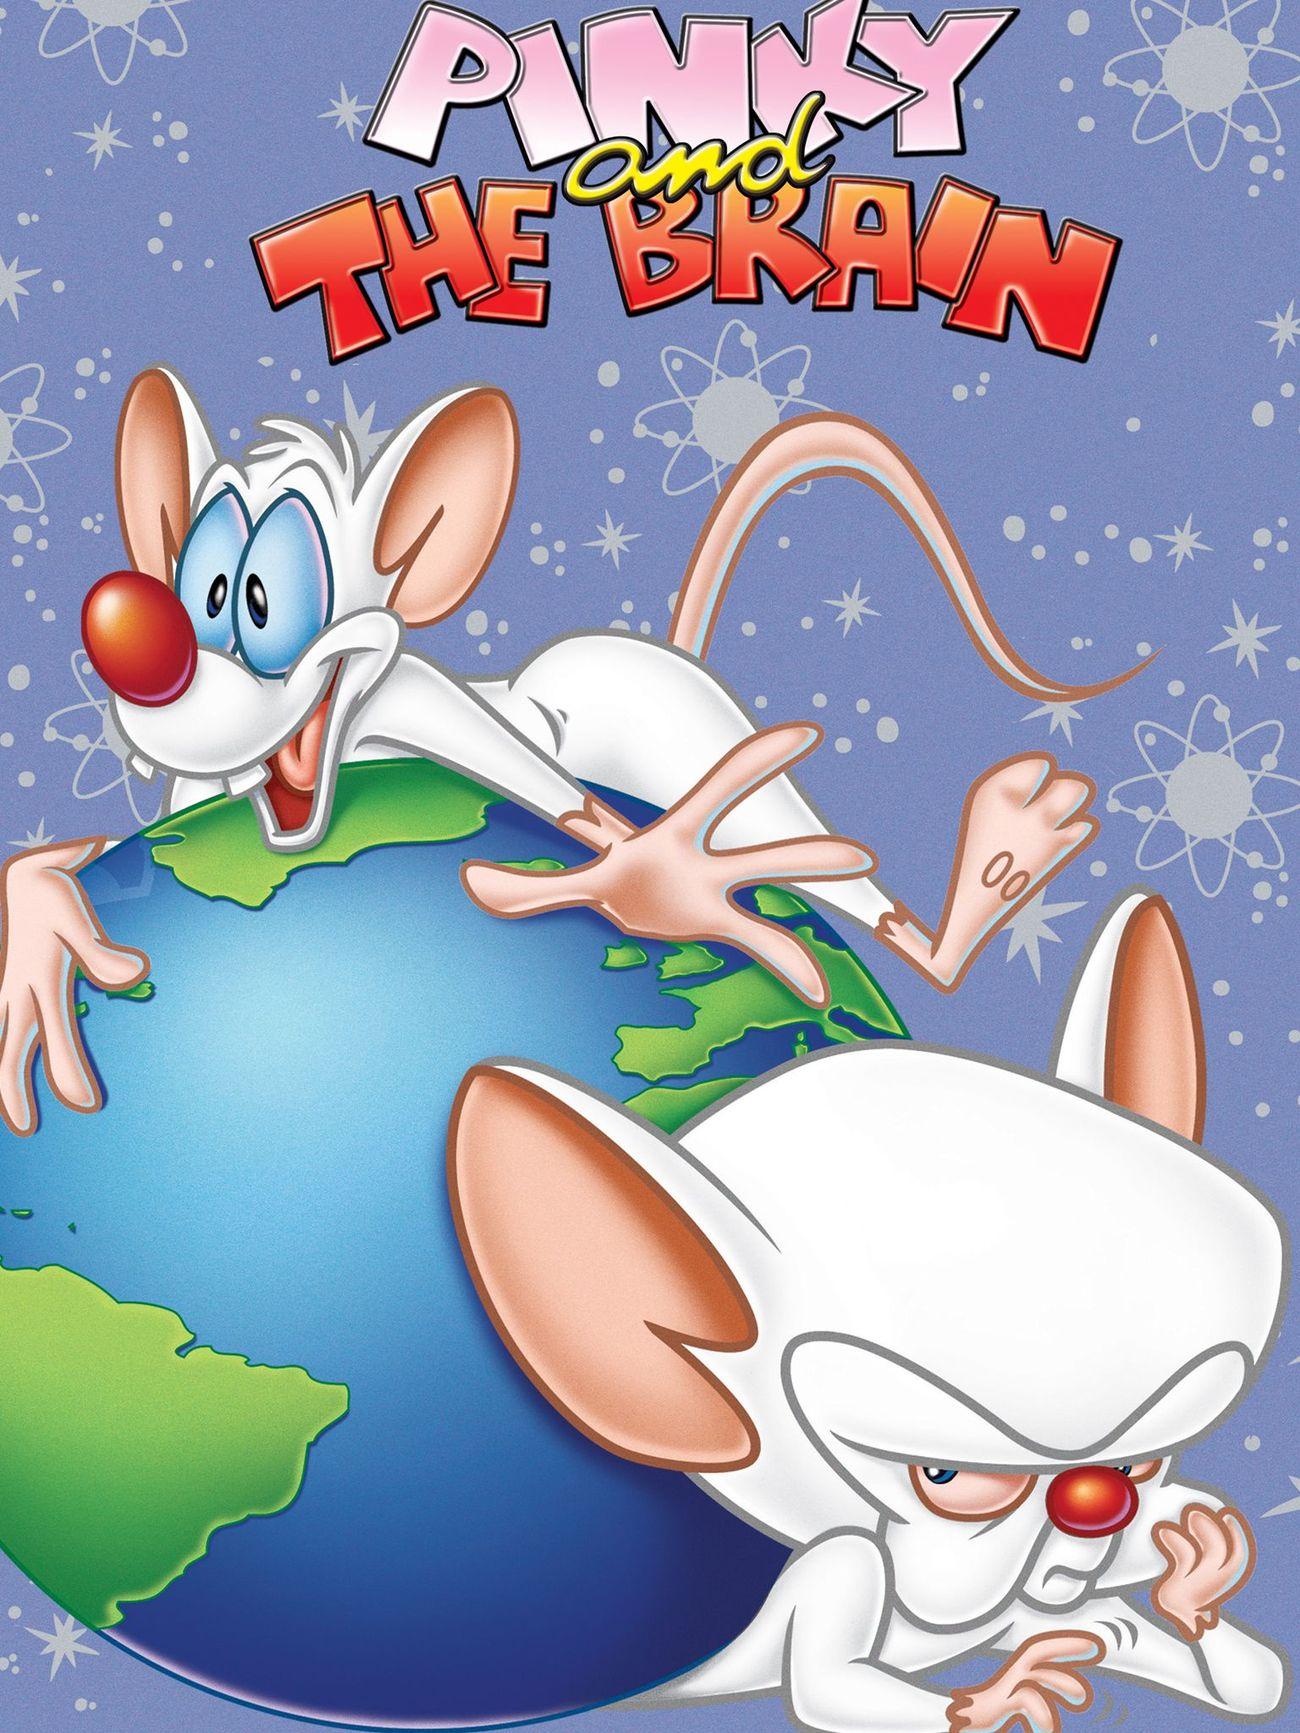 Pinky And The Brain Wallpaper High Quality